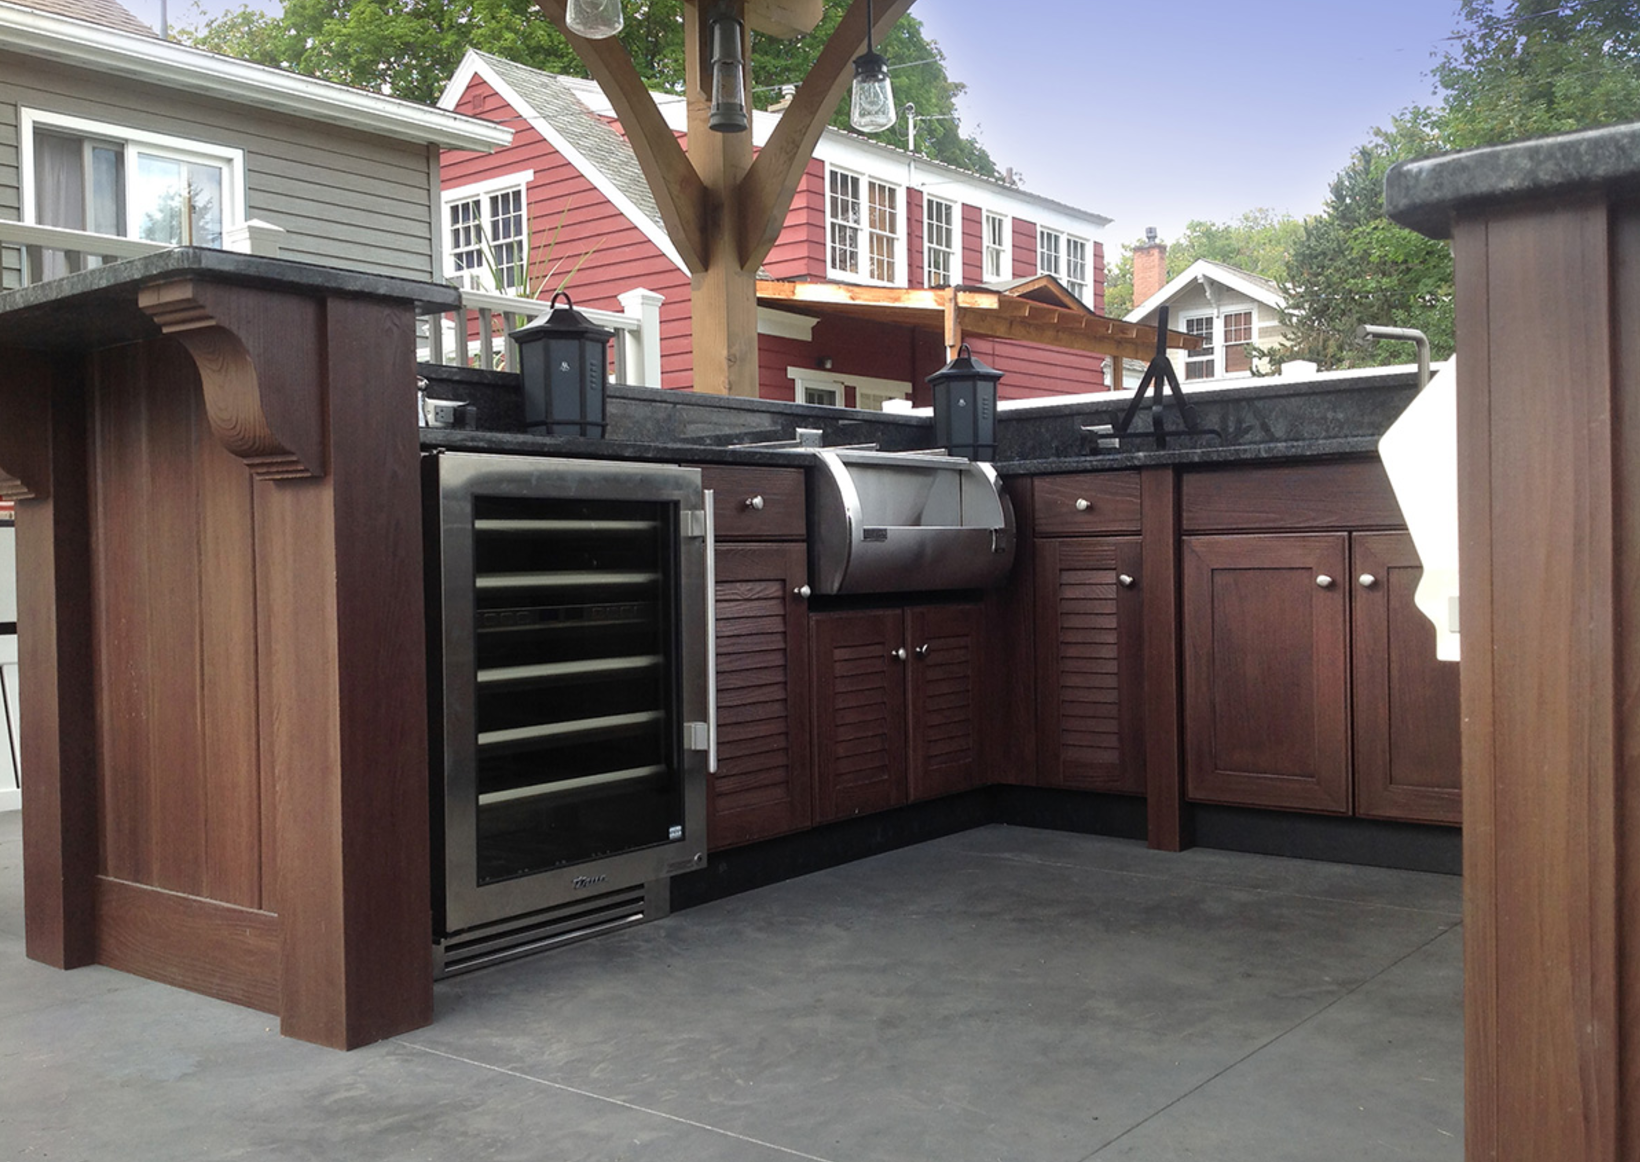 Weatherproof Outdoor Cabinets What, How To Weatherproof Outdoor Kitchen Cabinets